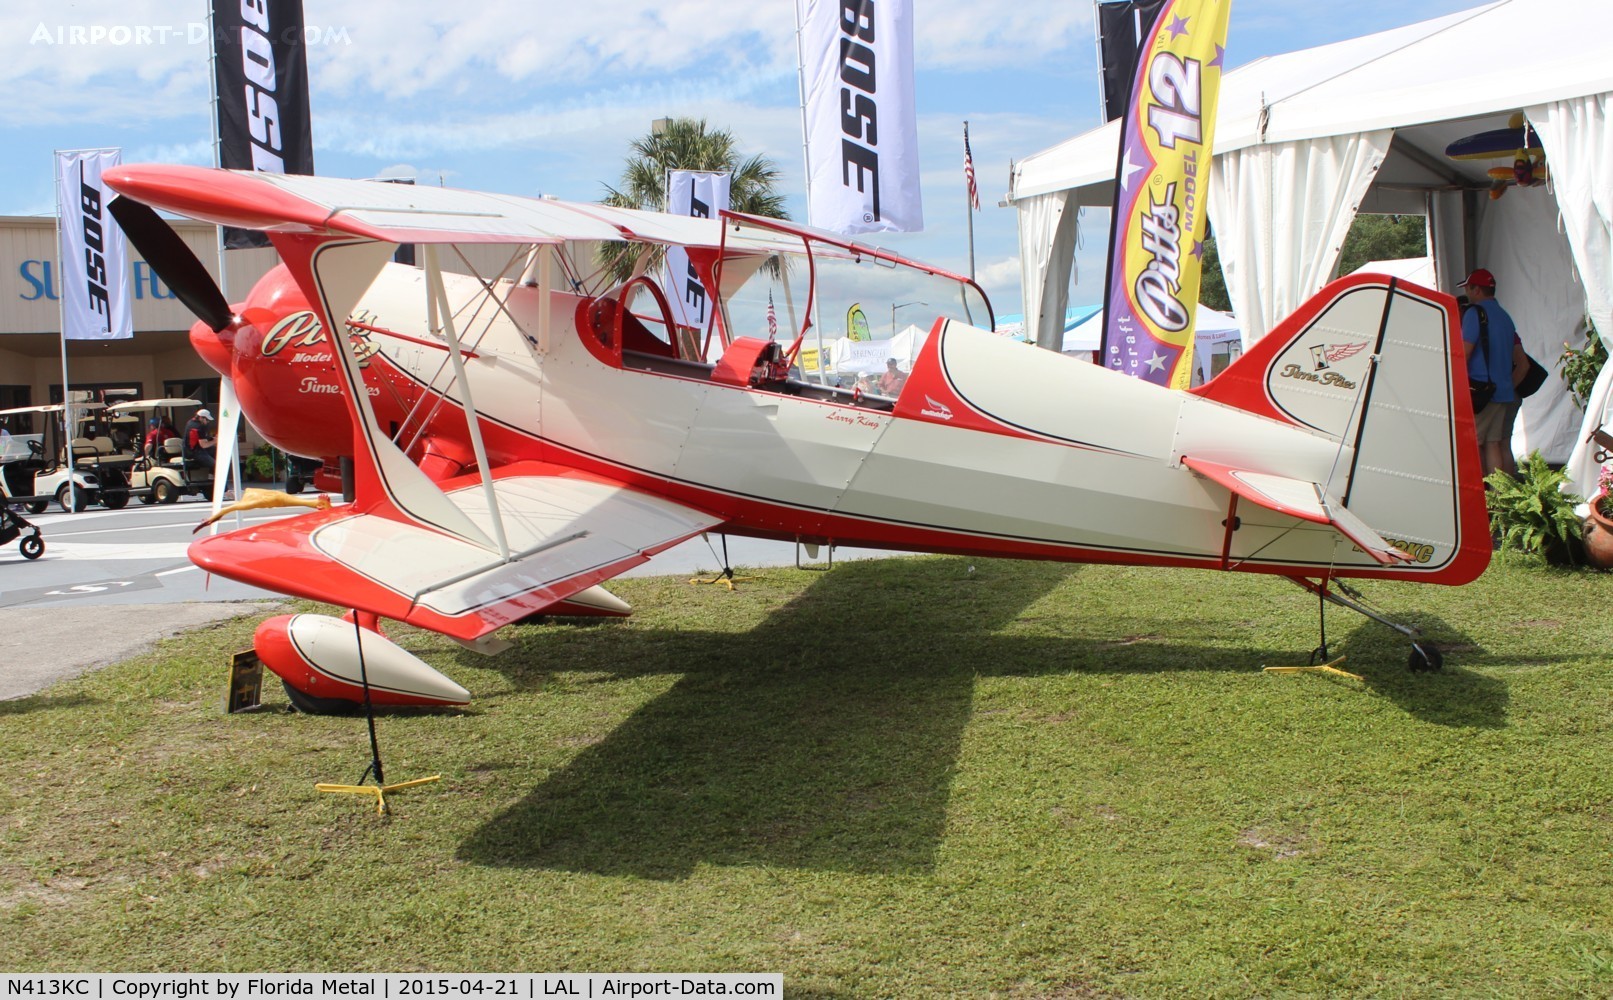 N413KC, 2011 Pitts M12 C/N 296, Pitts 12